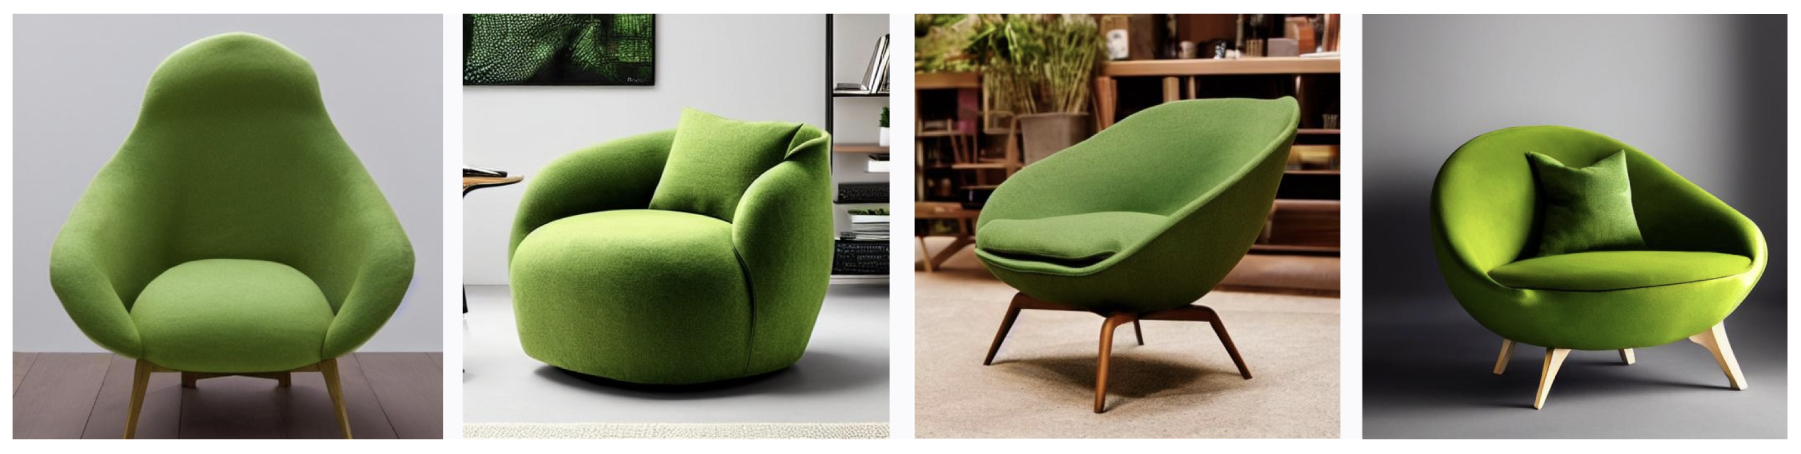 Four alternatives of armchairs generated locally in Tryolabs’ hardware.